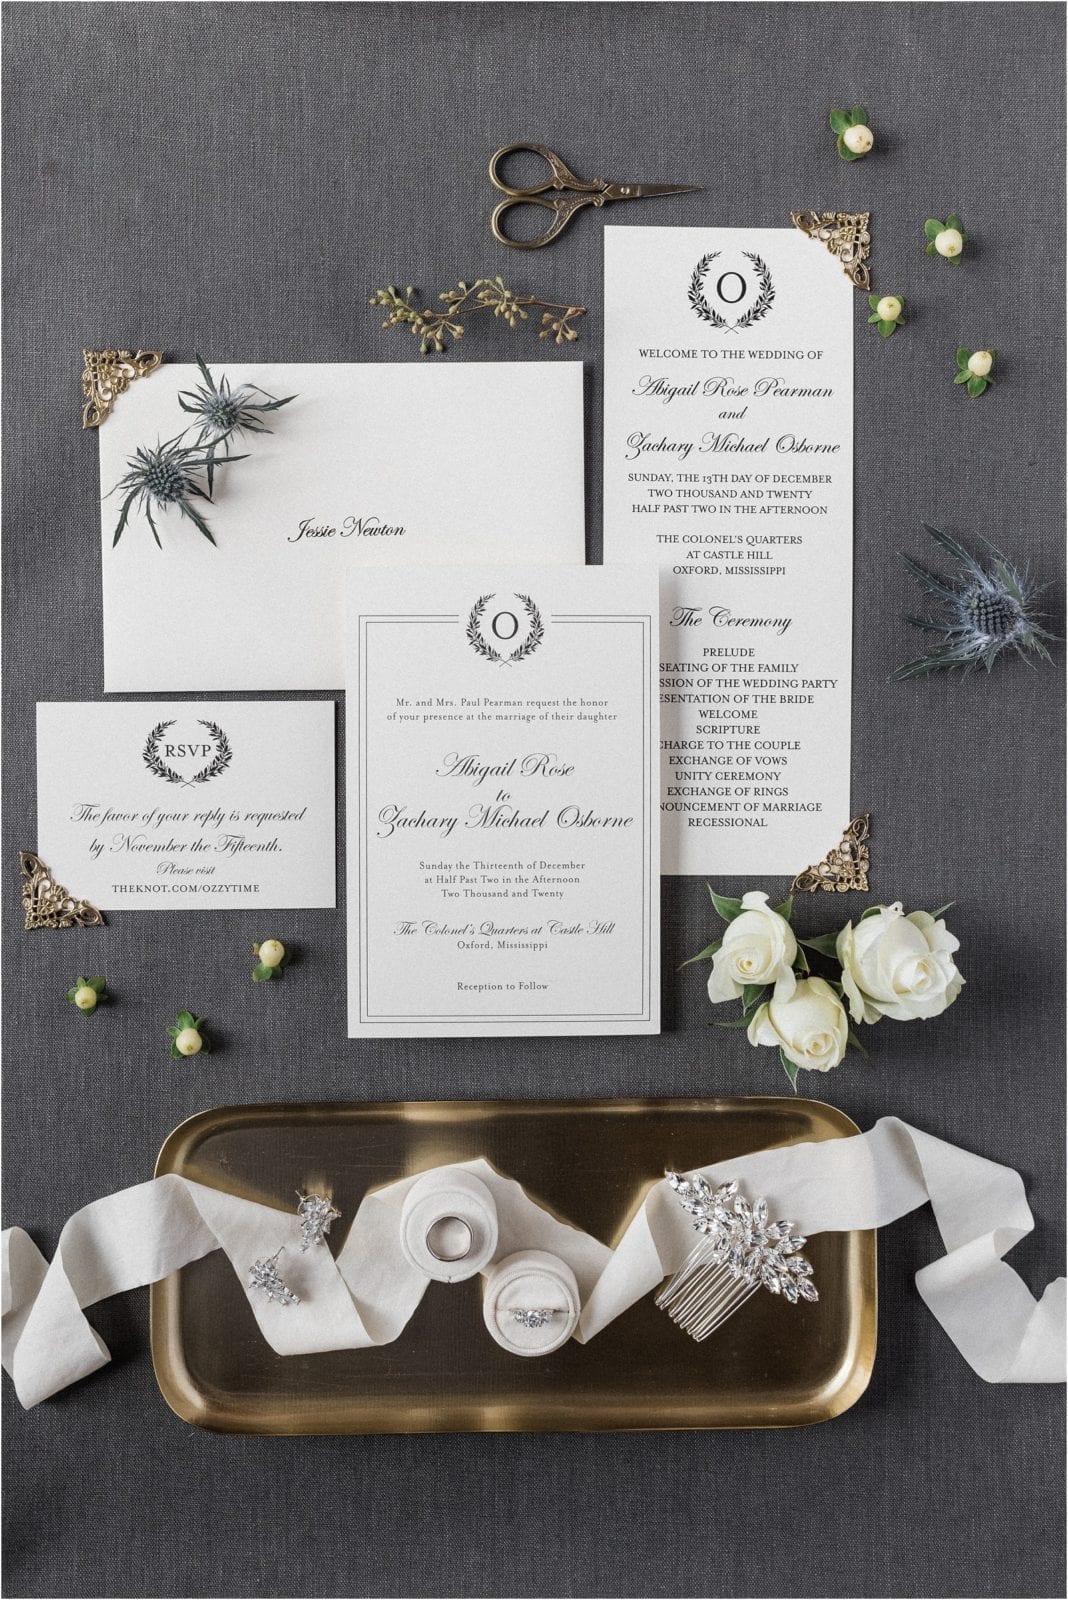 wedding invitation suite with rings